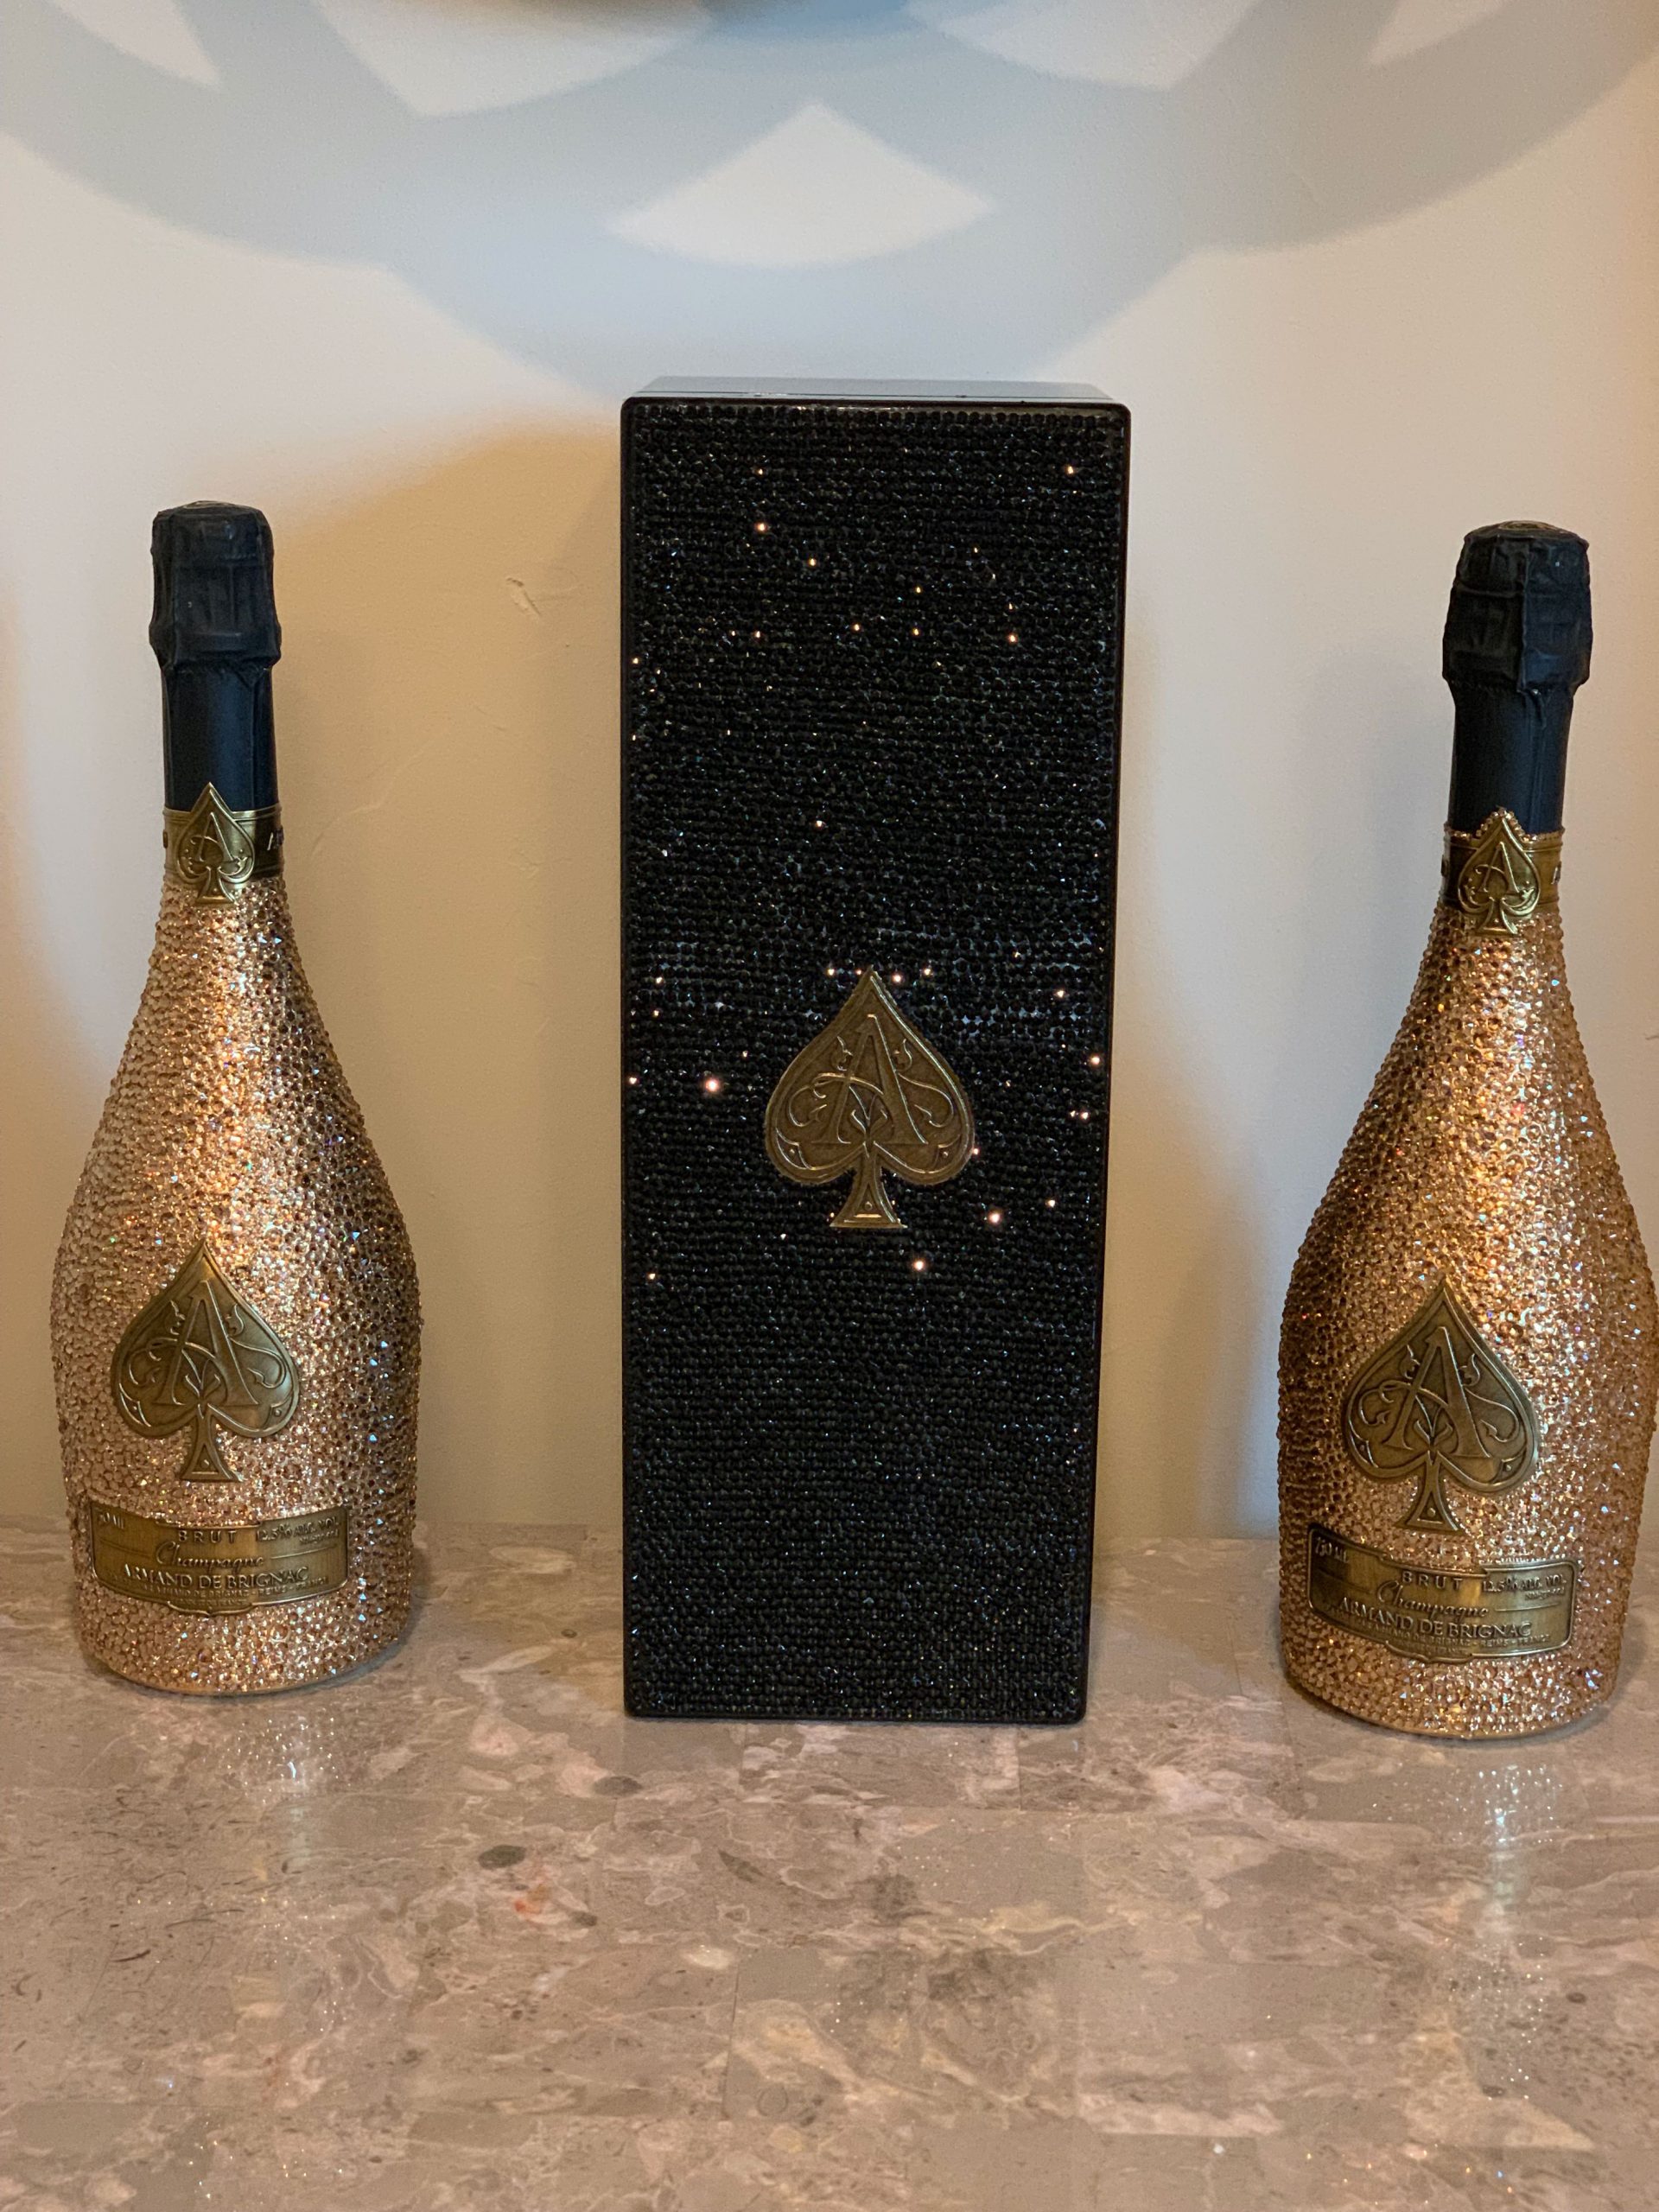 Swarovski covered Ace of Spades Champagne bottles and case